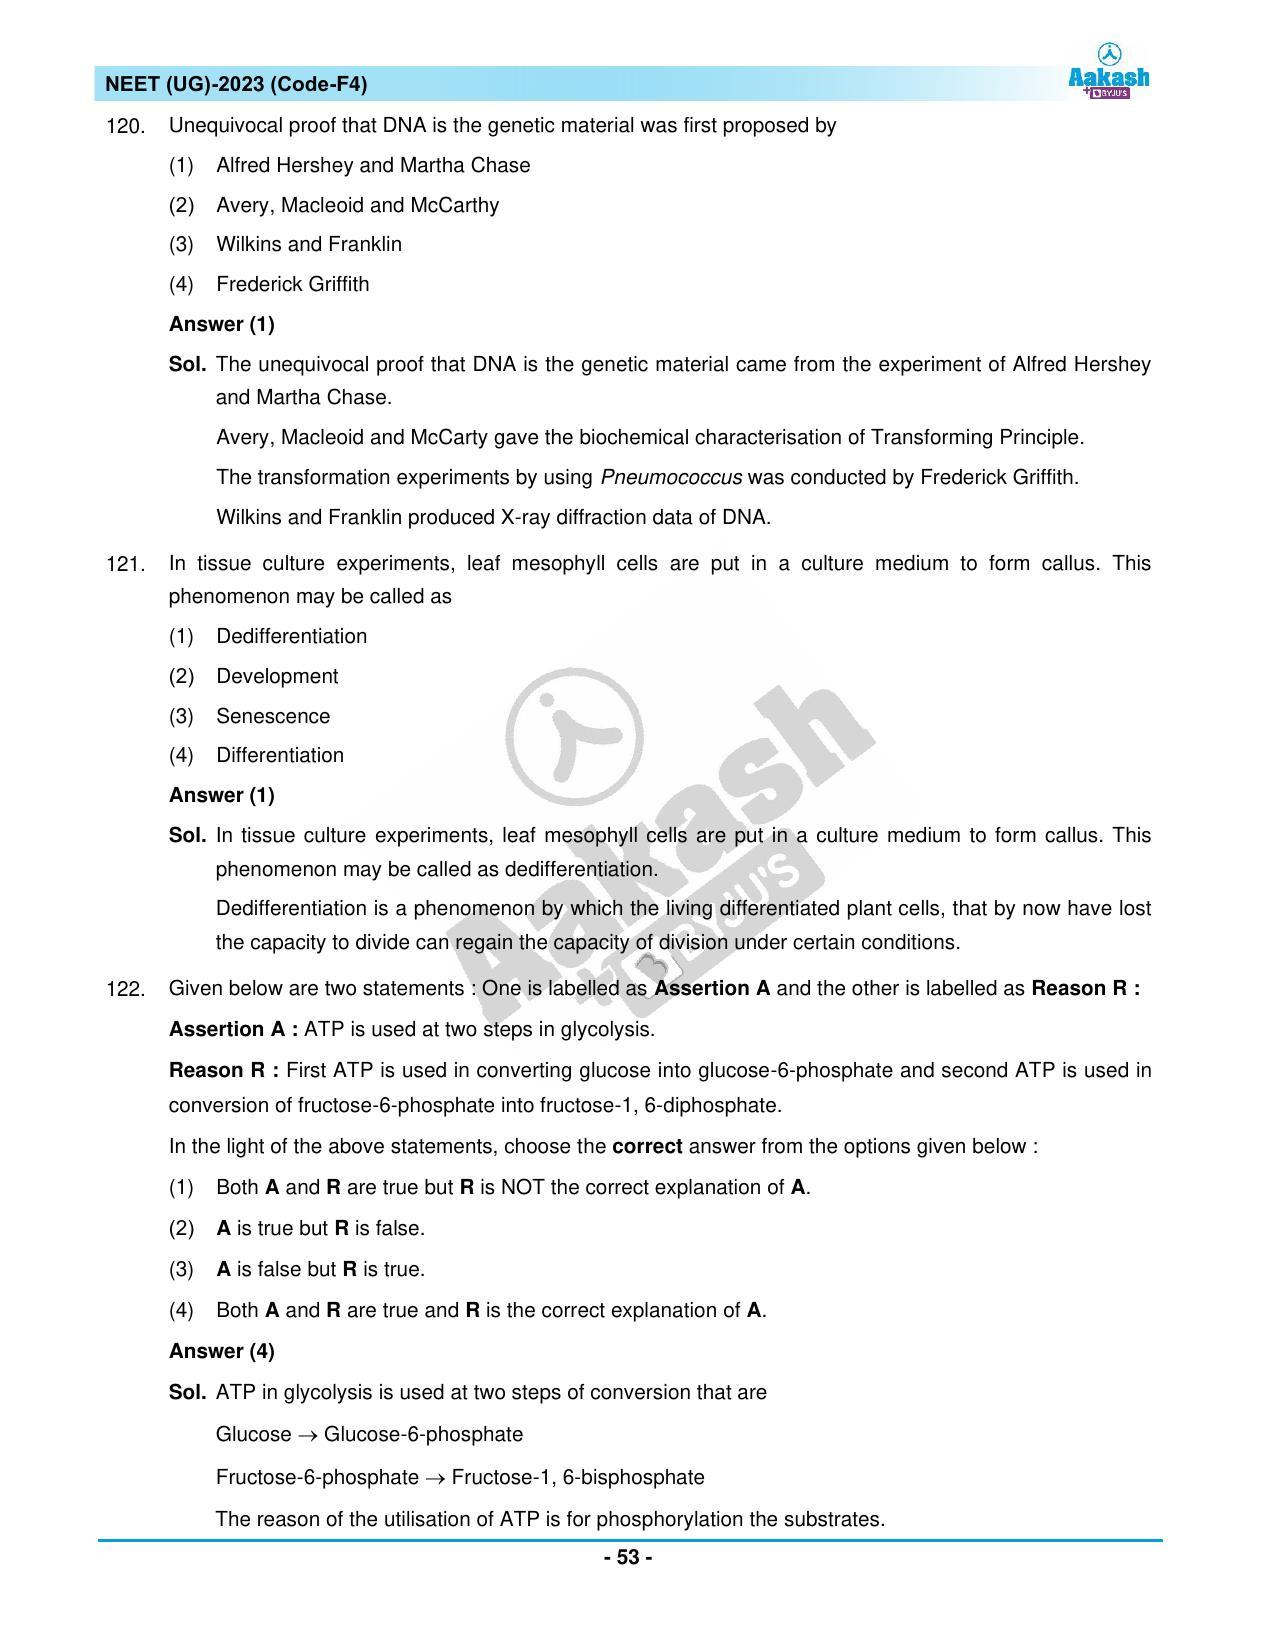 NEET 2023 Question Paper F4 - Page 53